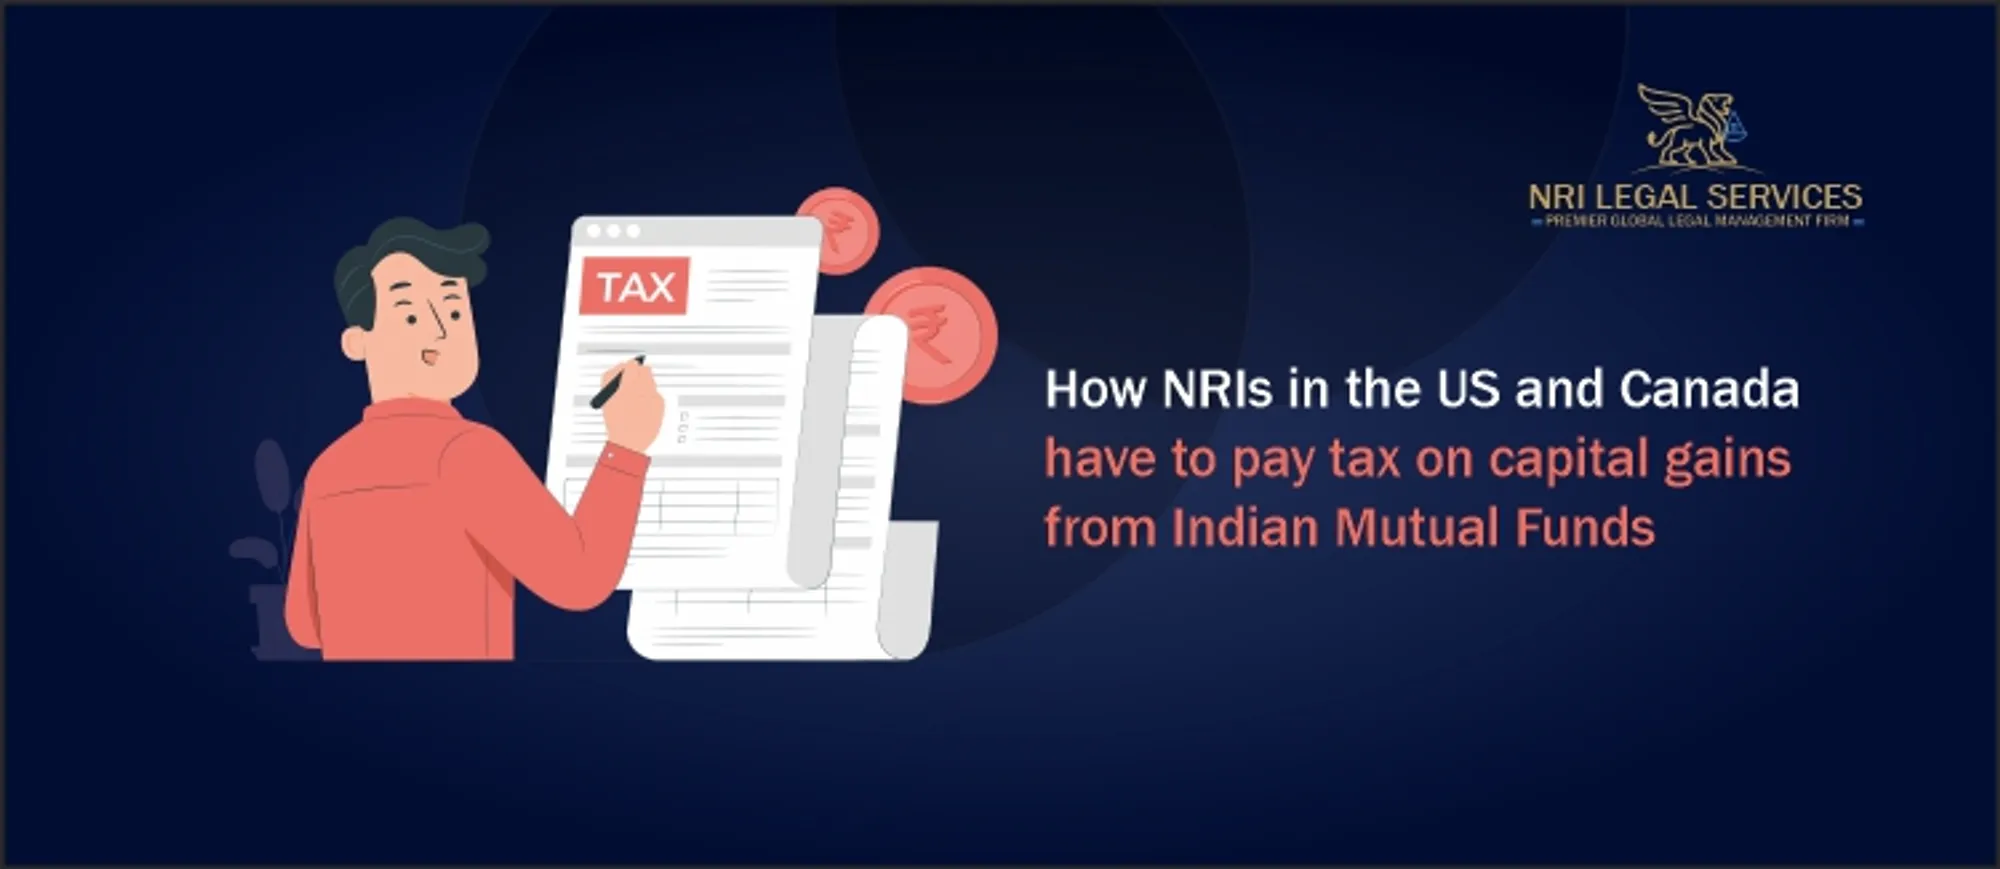 How NRIs in the US and Canada have to pay tax on capital gains from Indian mutual funds